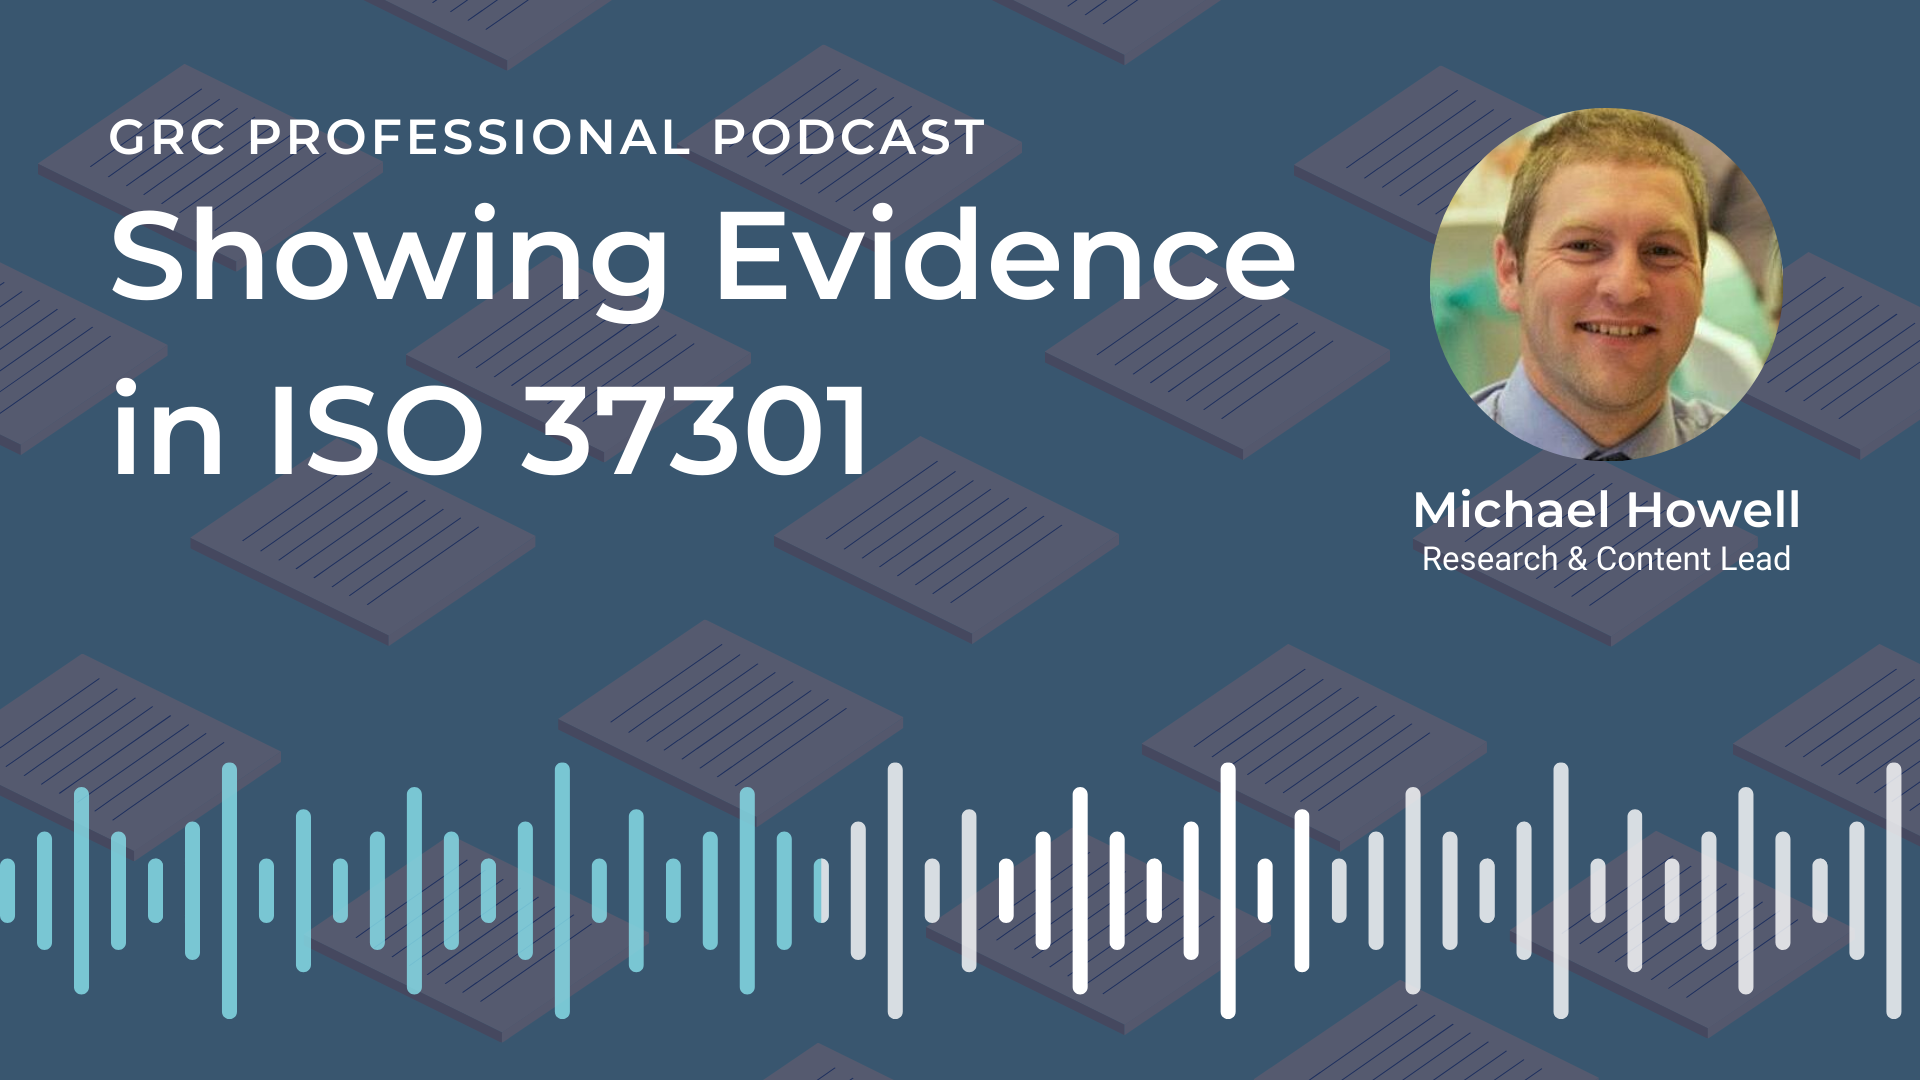 The GRC Professional Podcast episode: Showing Evidence in ISO 37301 with Michael Howell, Research & Content Lead